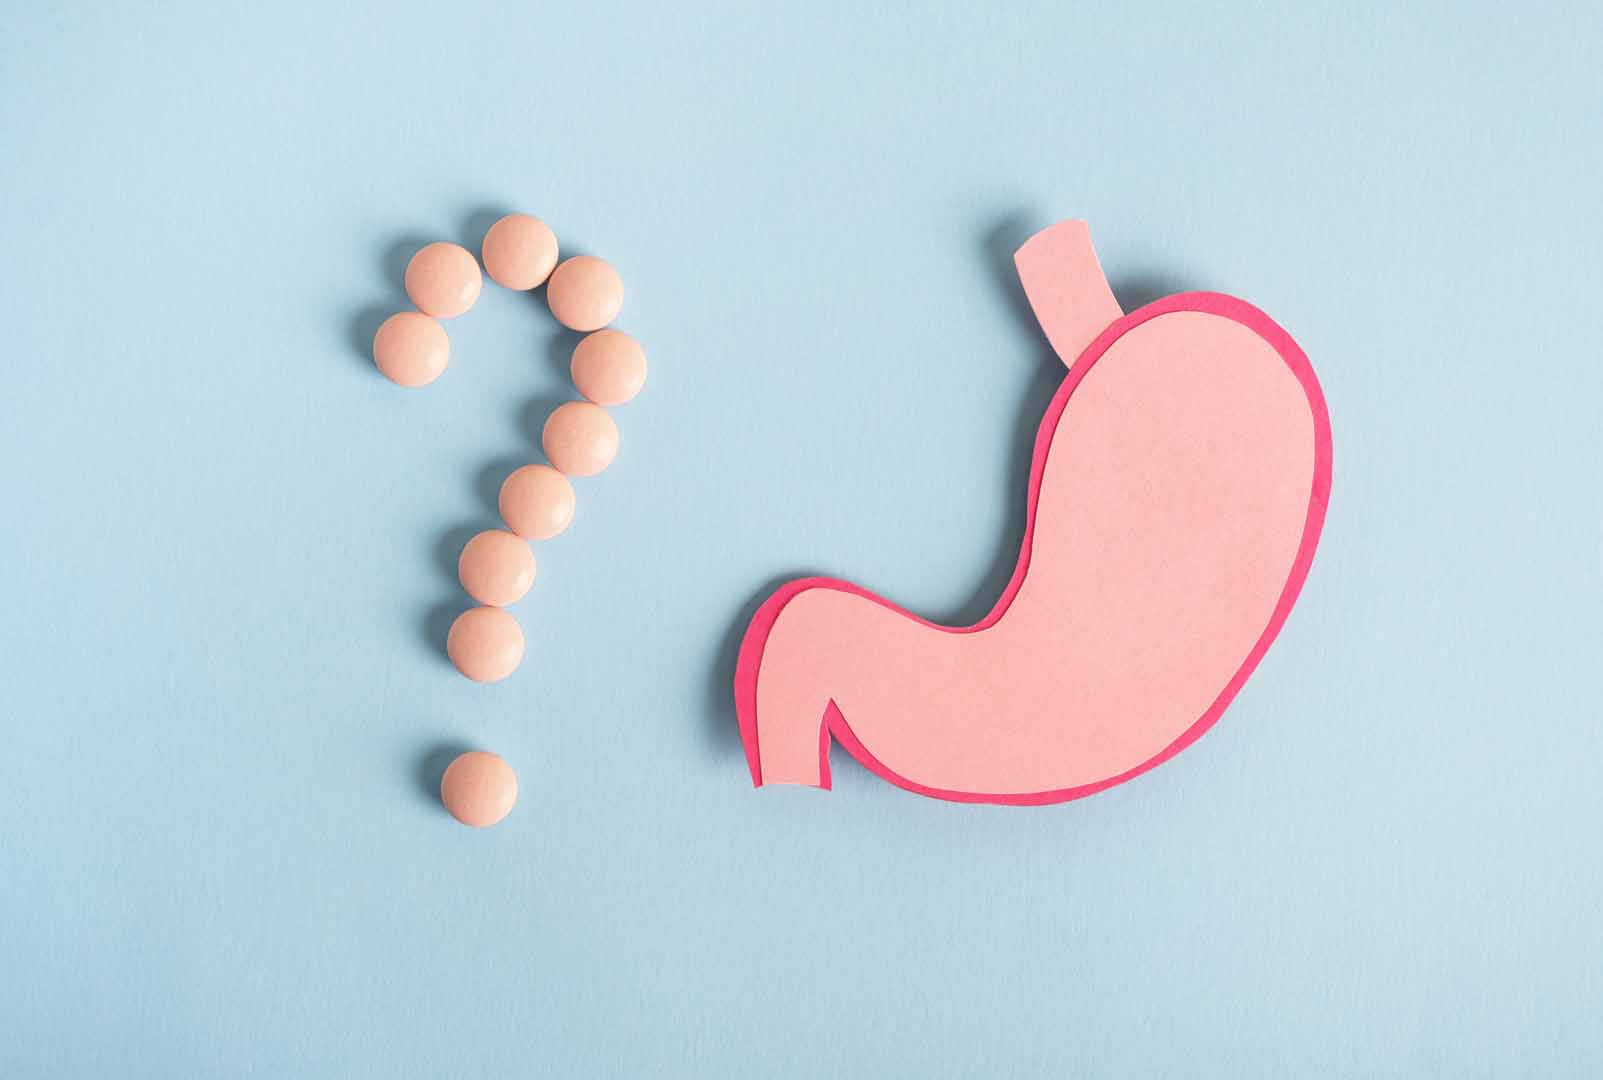 Stomach decorative model with pills in shape question mark on light blue background